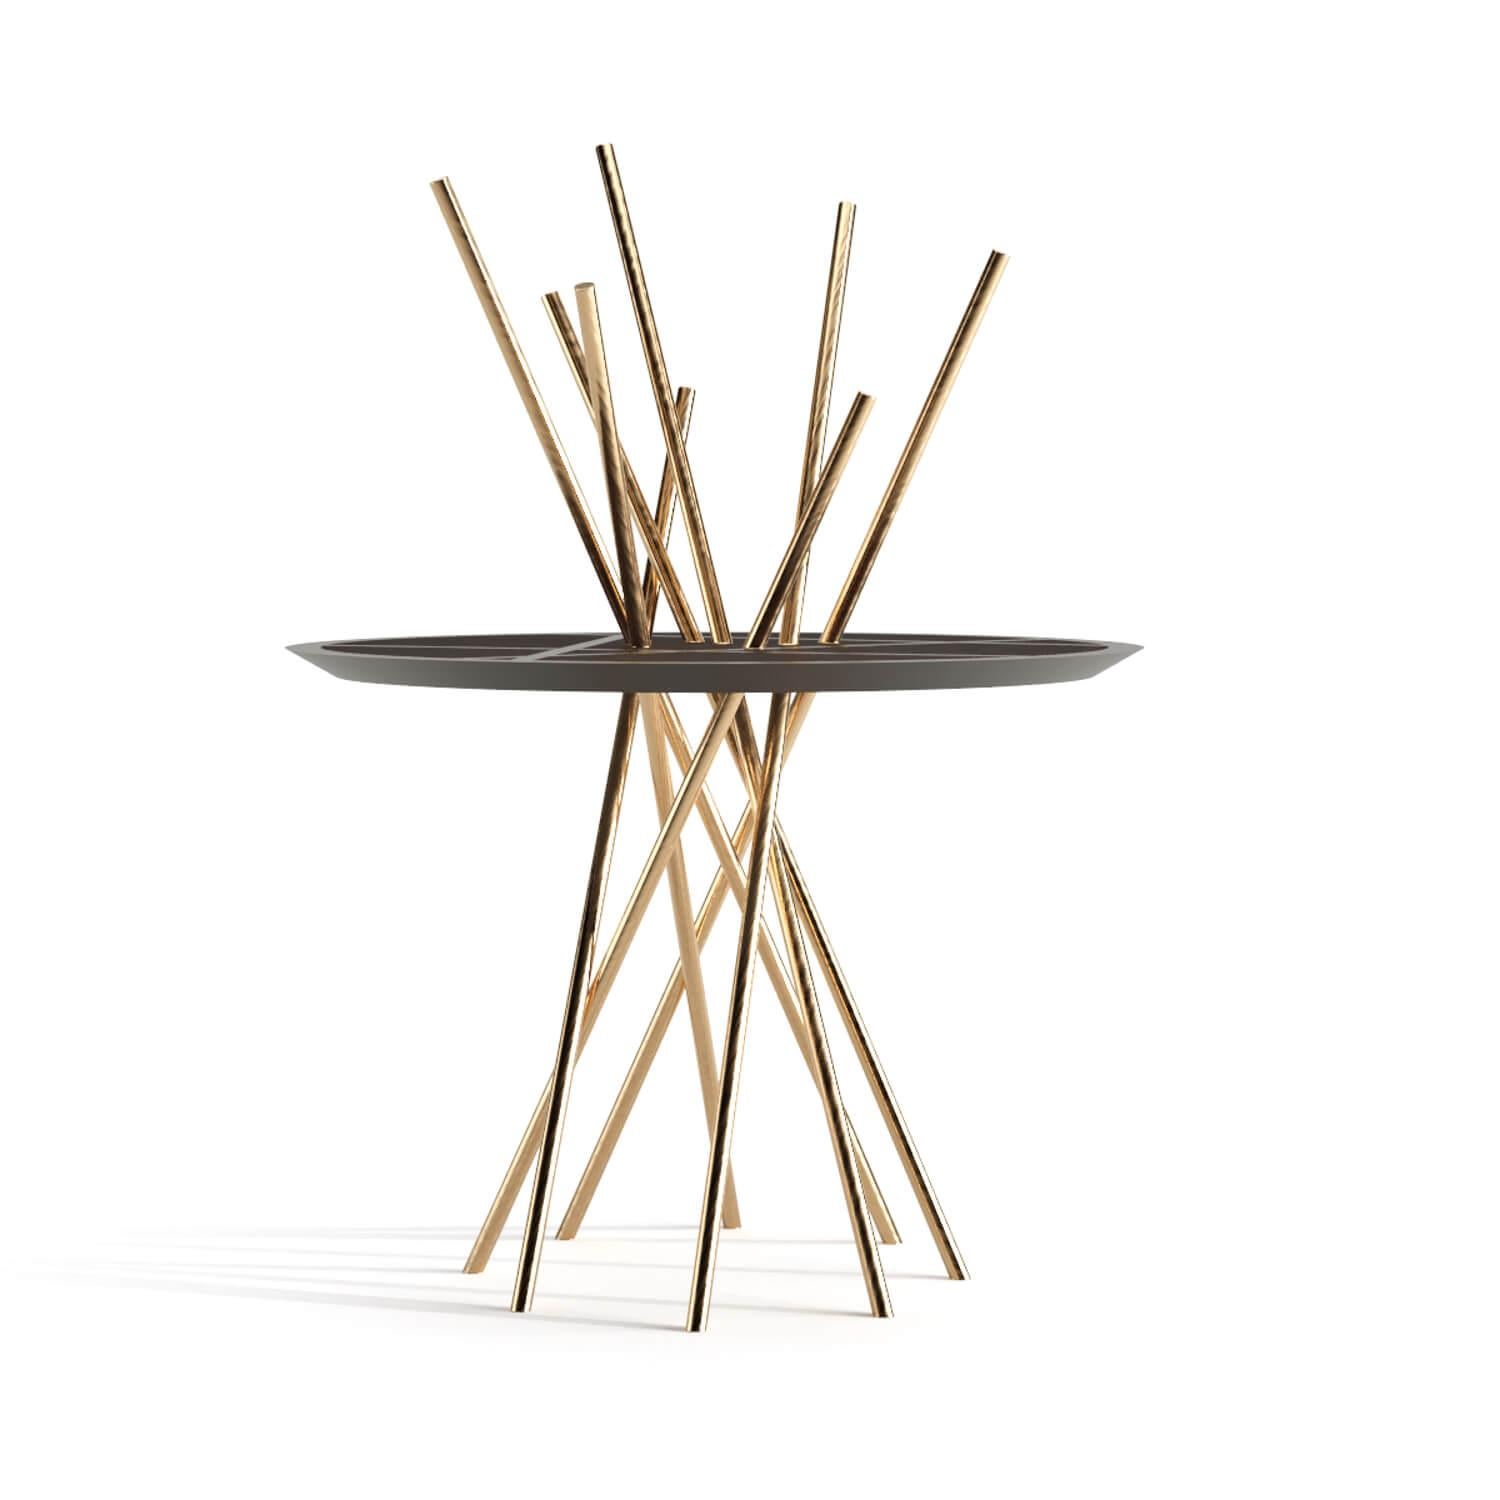 The Modernity Round Pedestal Table Walnut Wood White Lacquer Brushed Stainless Steel (en anglais) en vente 9